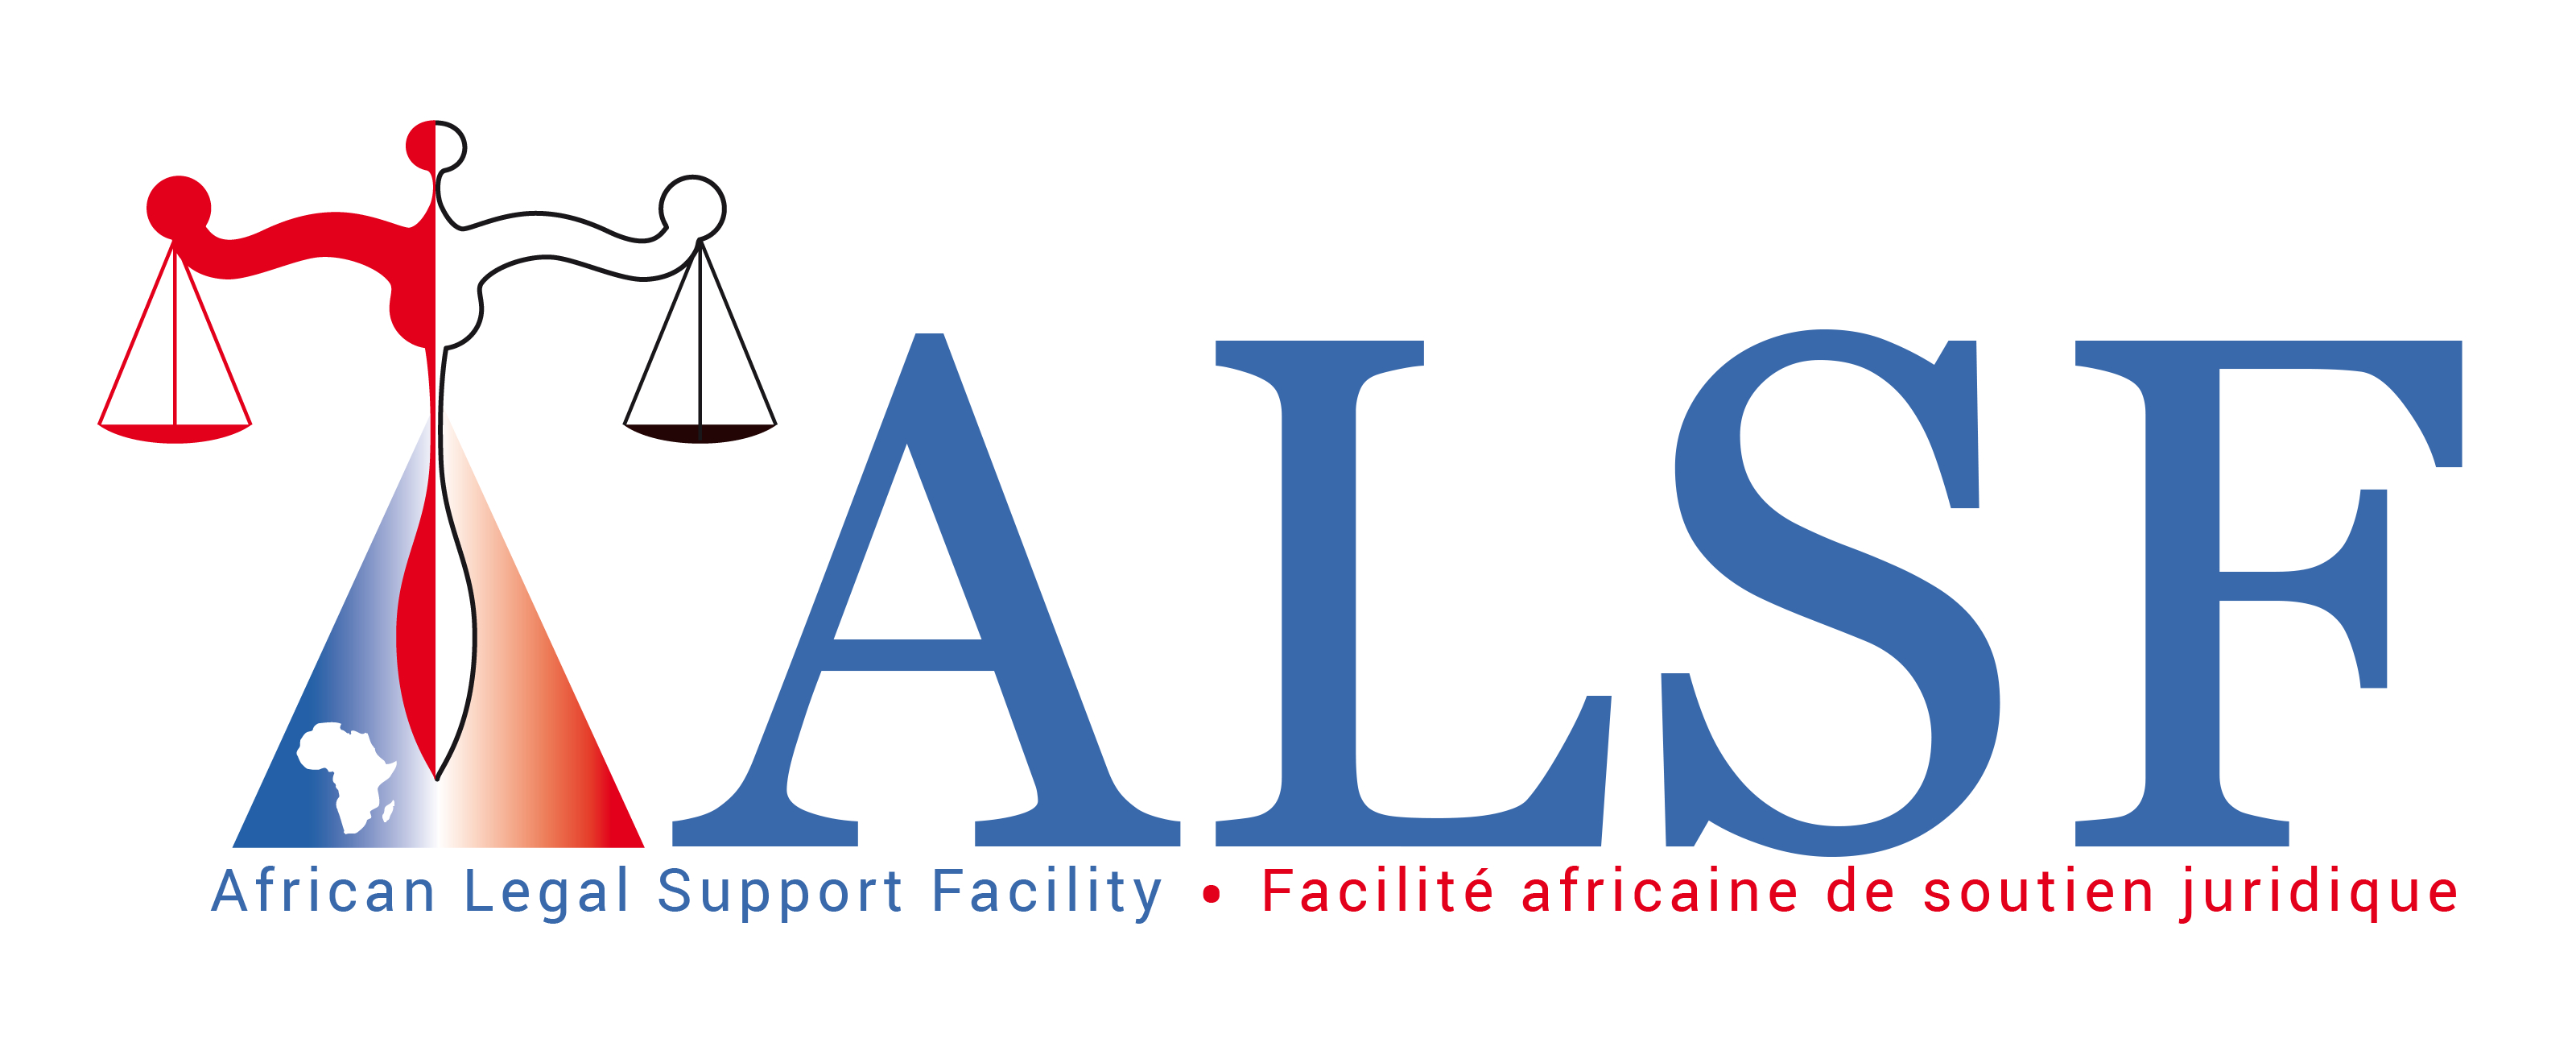 African Legal Support Facility